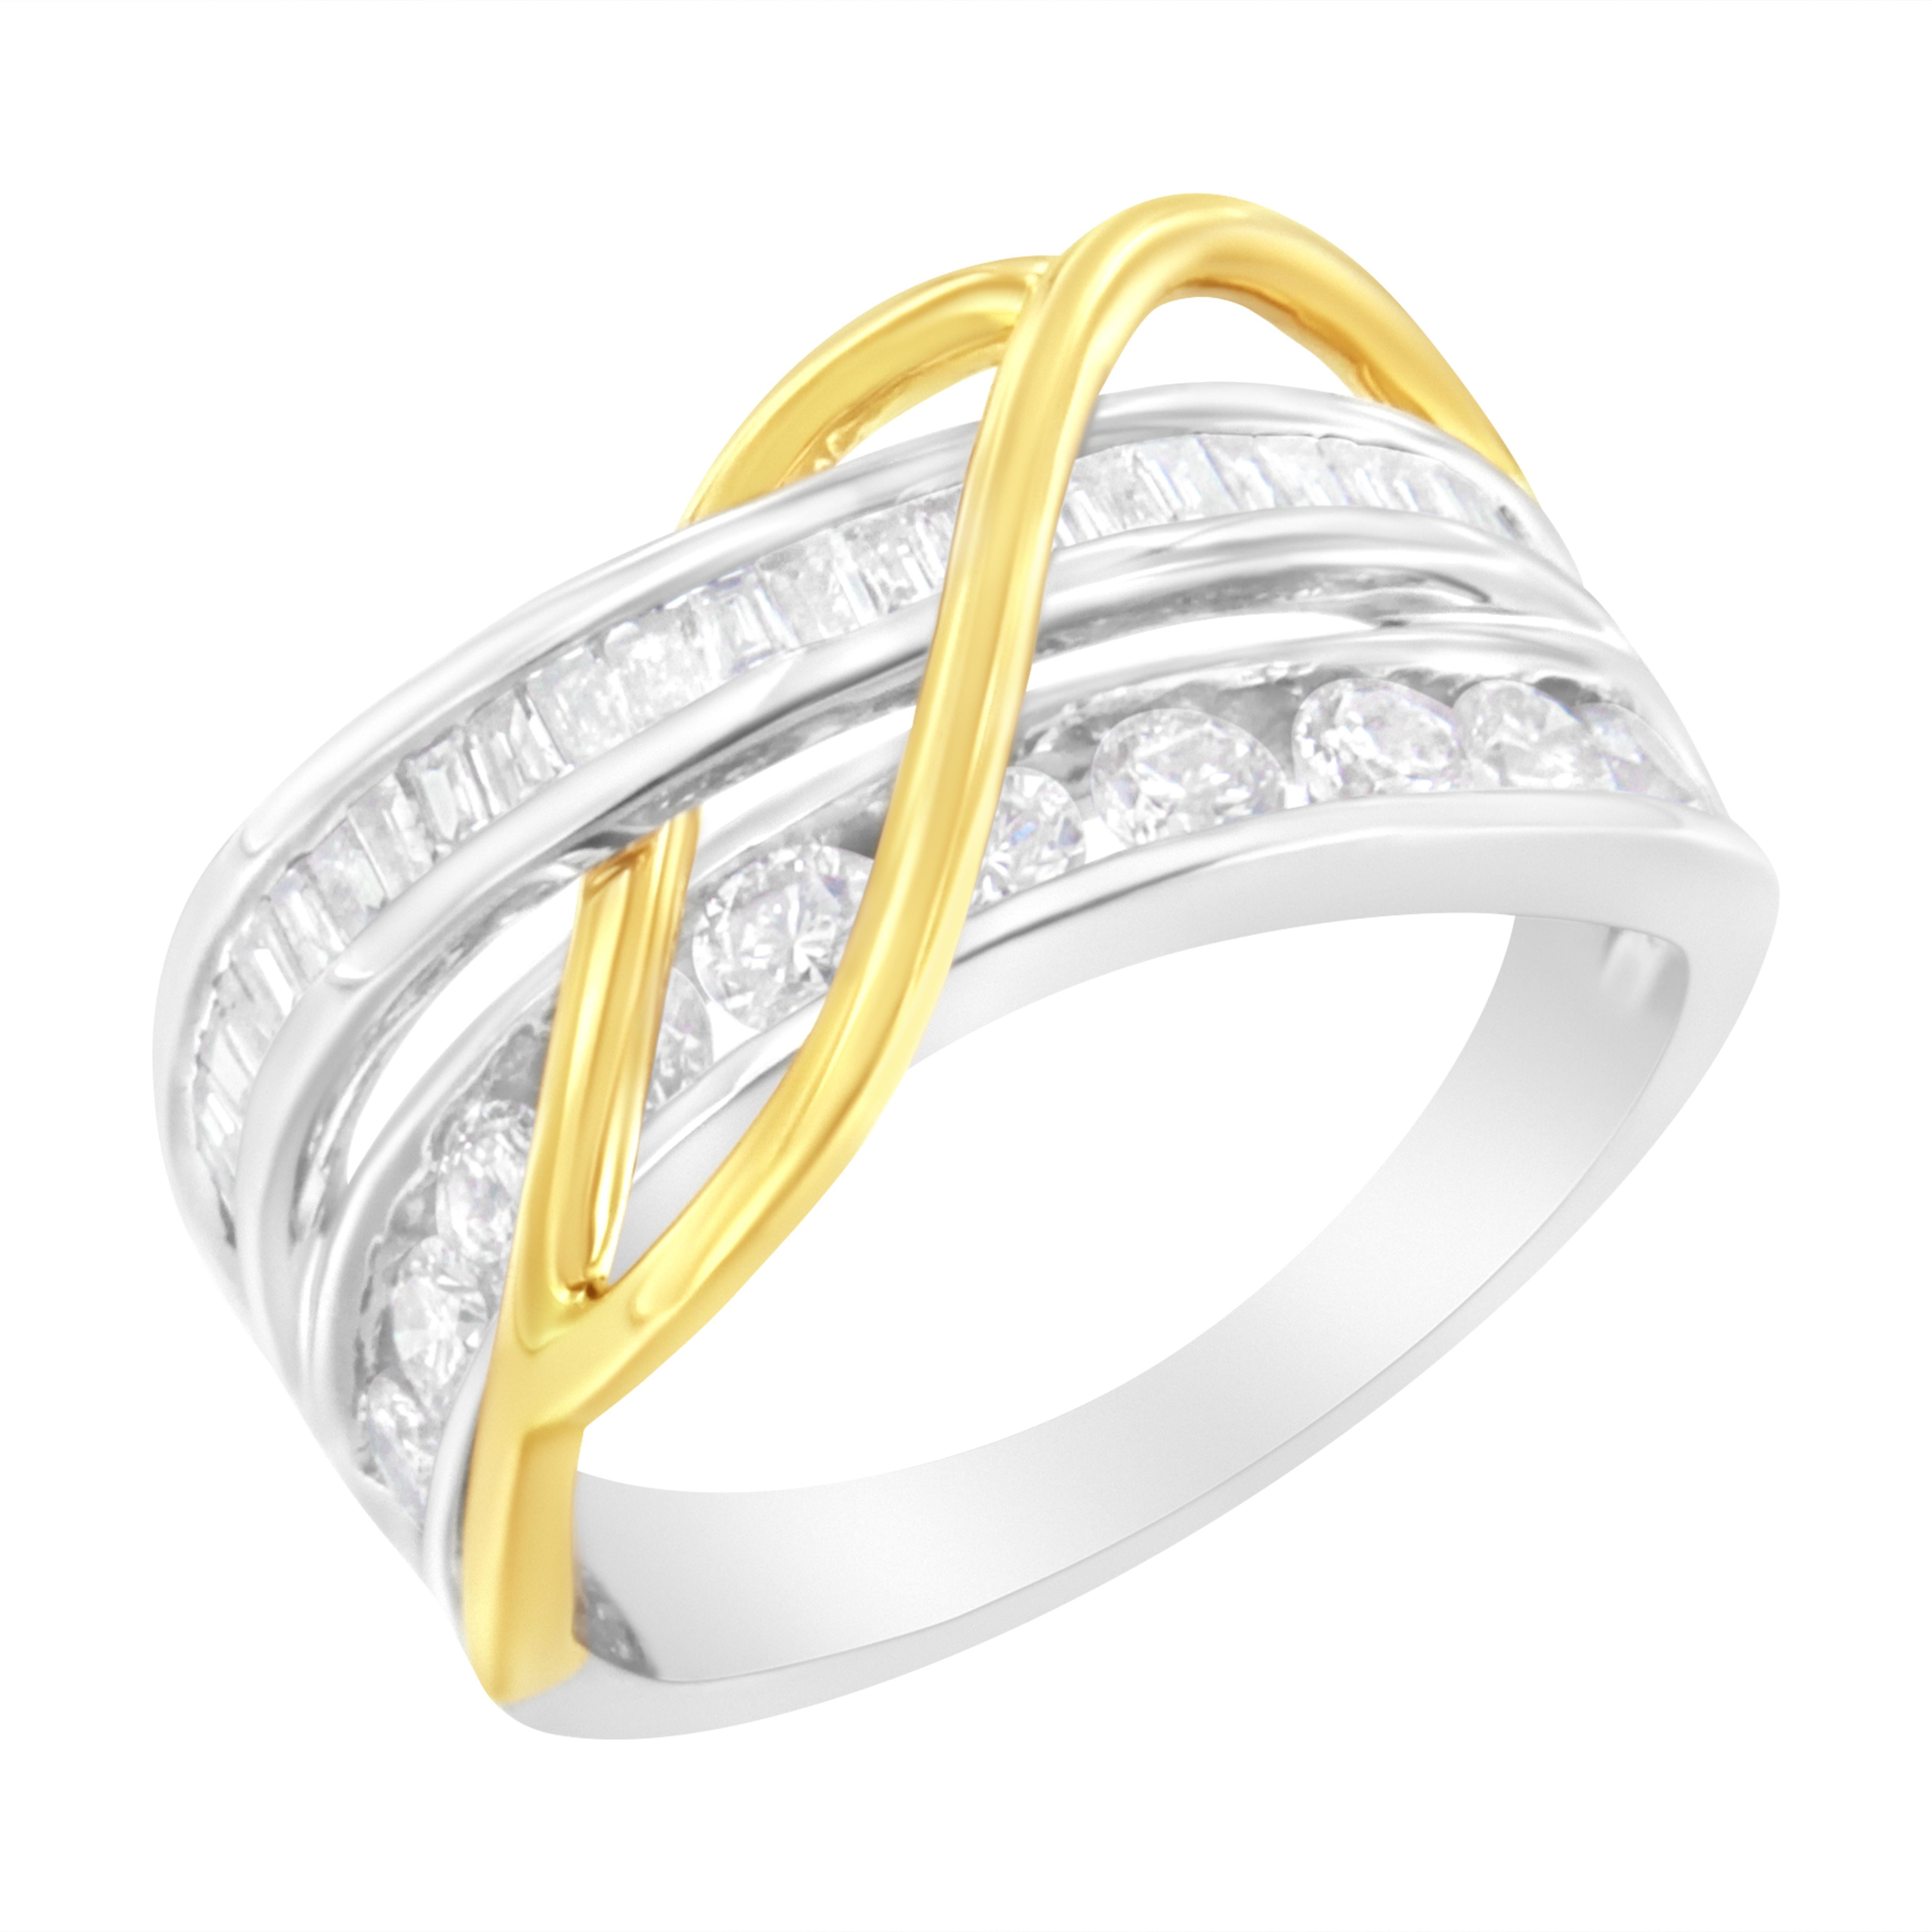 For Sale:  10K White and Yellow Gold 1 1/10 Carat Channel-Set Diamond Bypass Band Ring 3